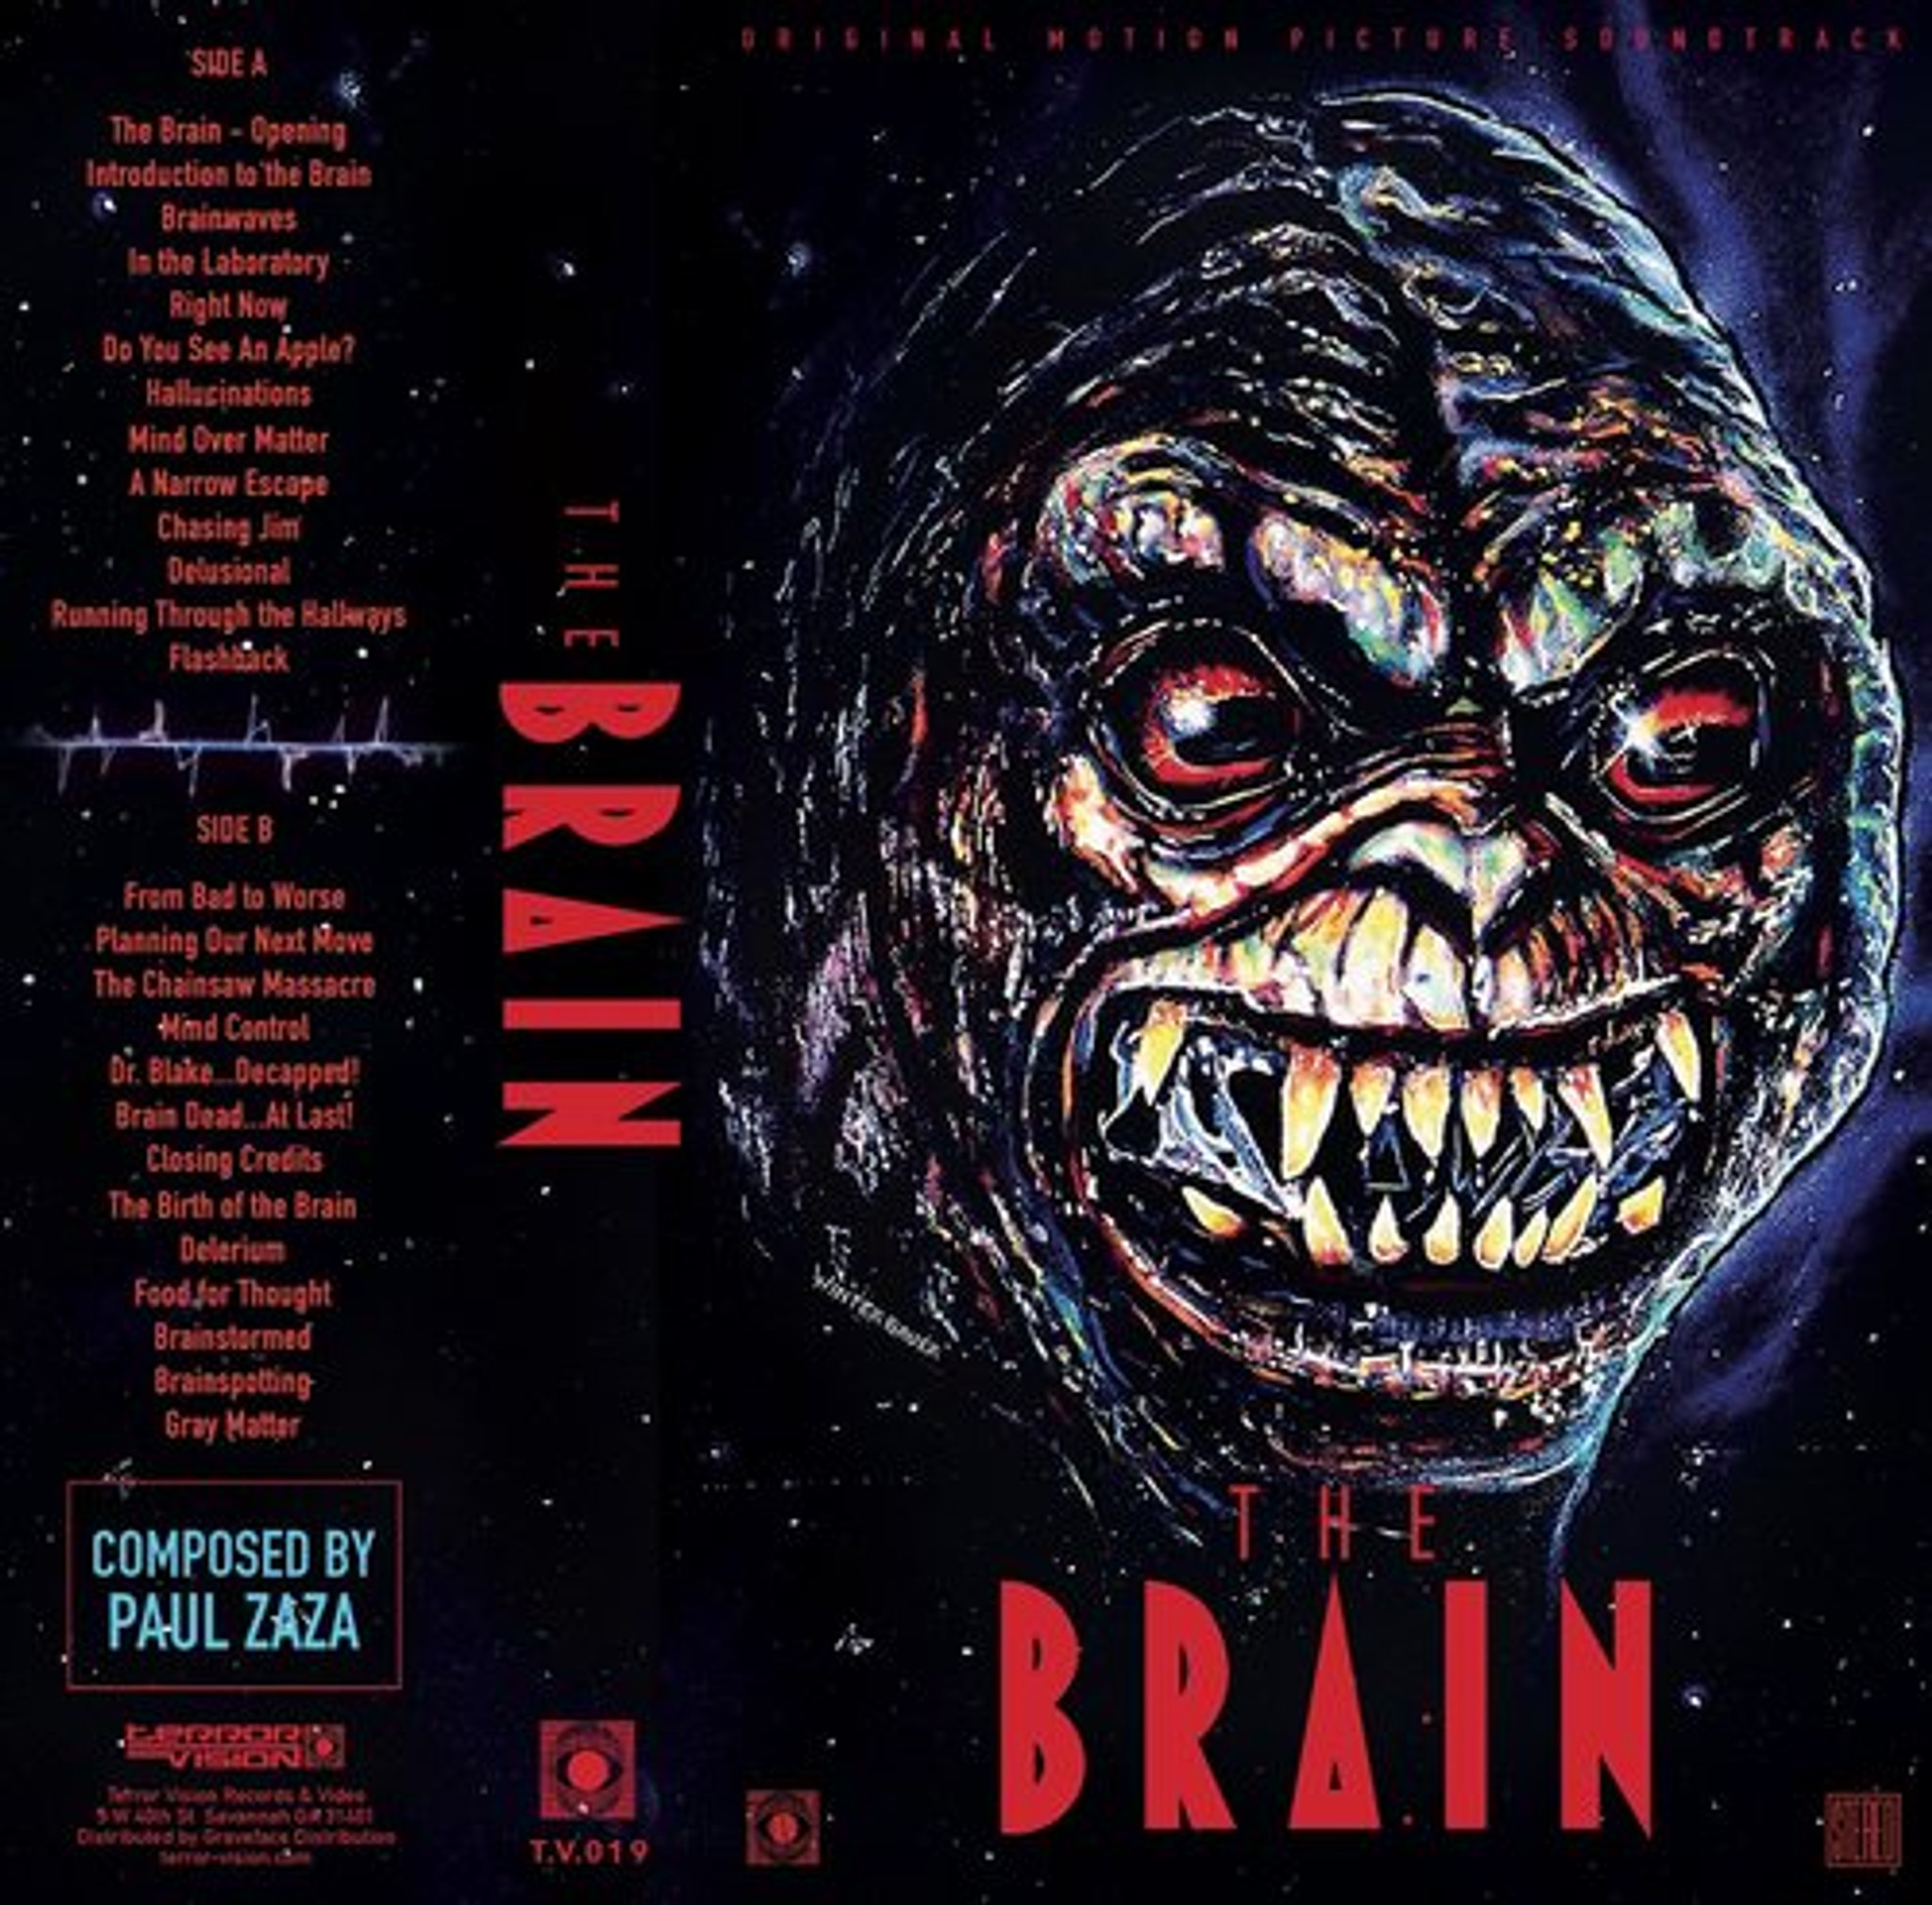 THE BRAIN OST (1988) AVAILABLE NOW